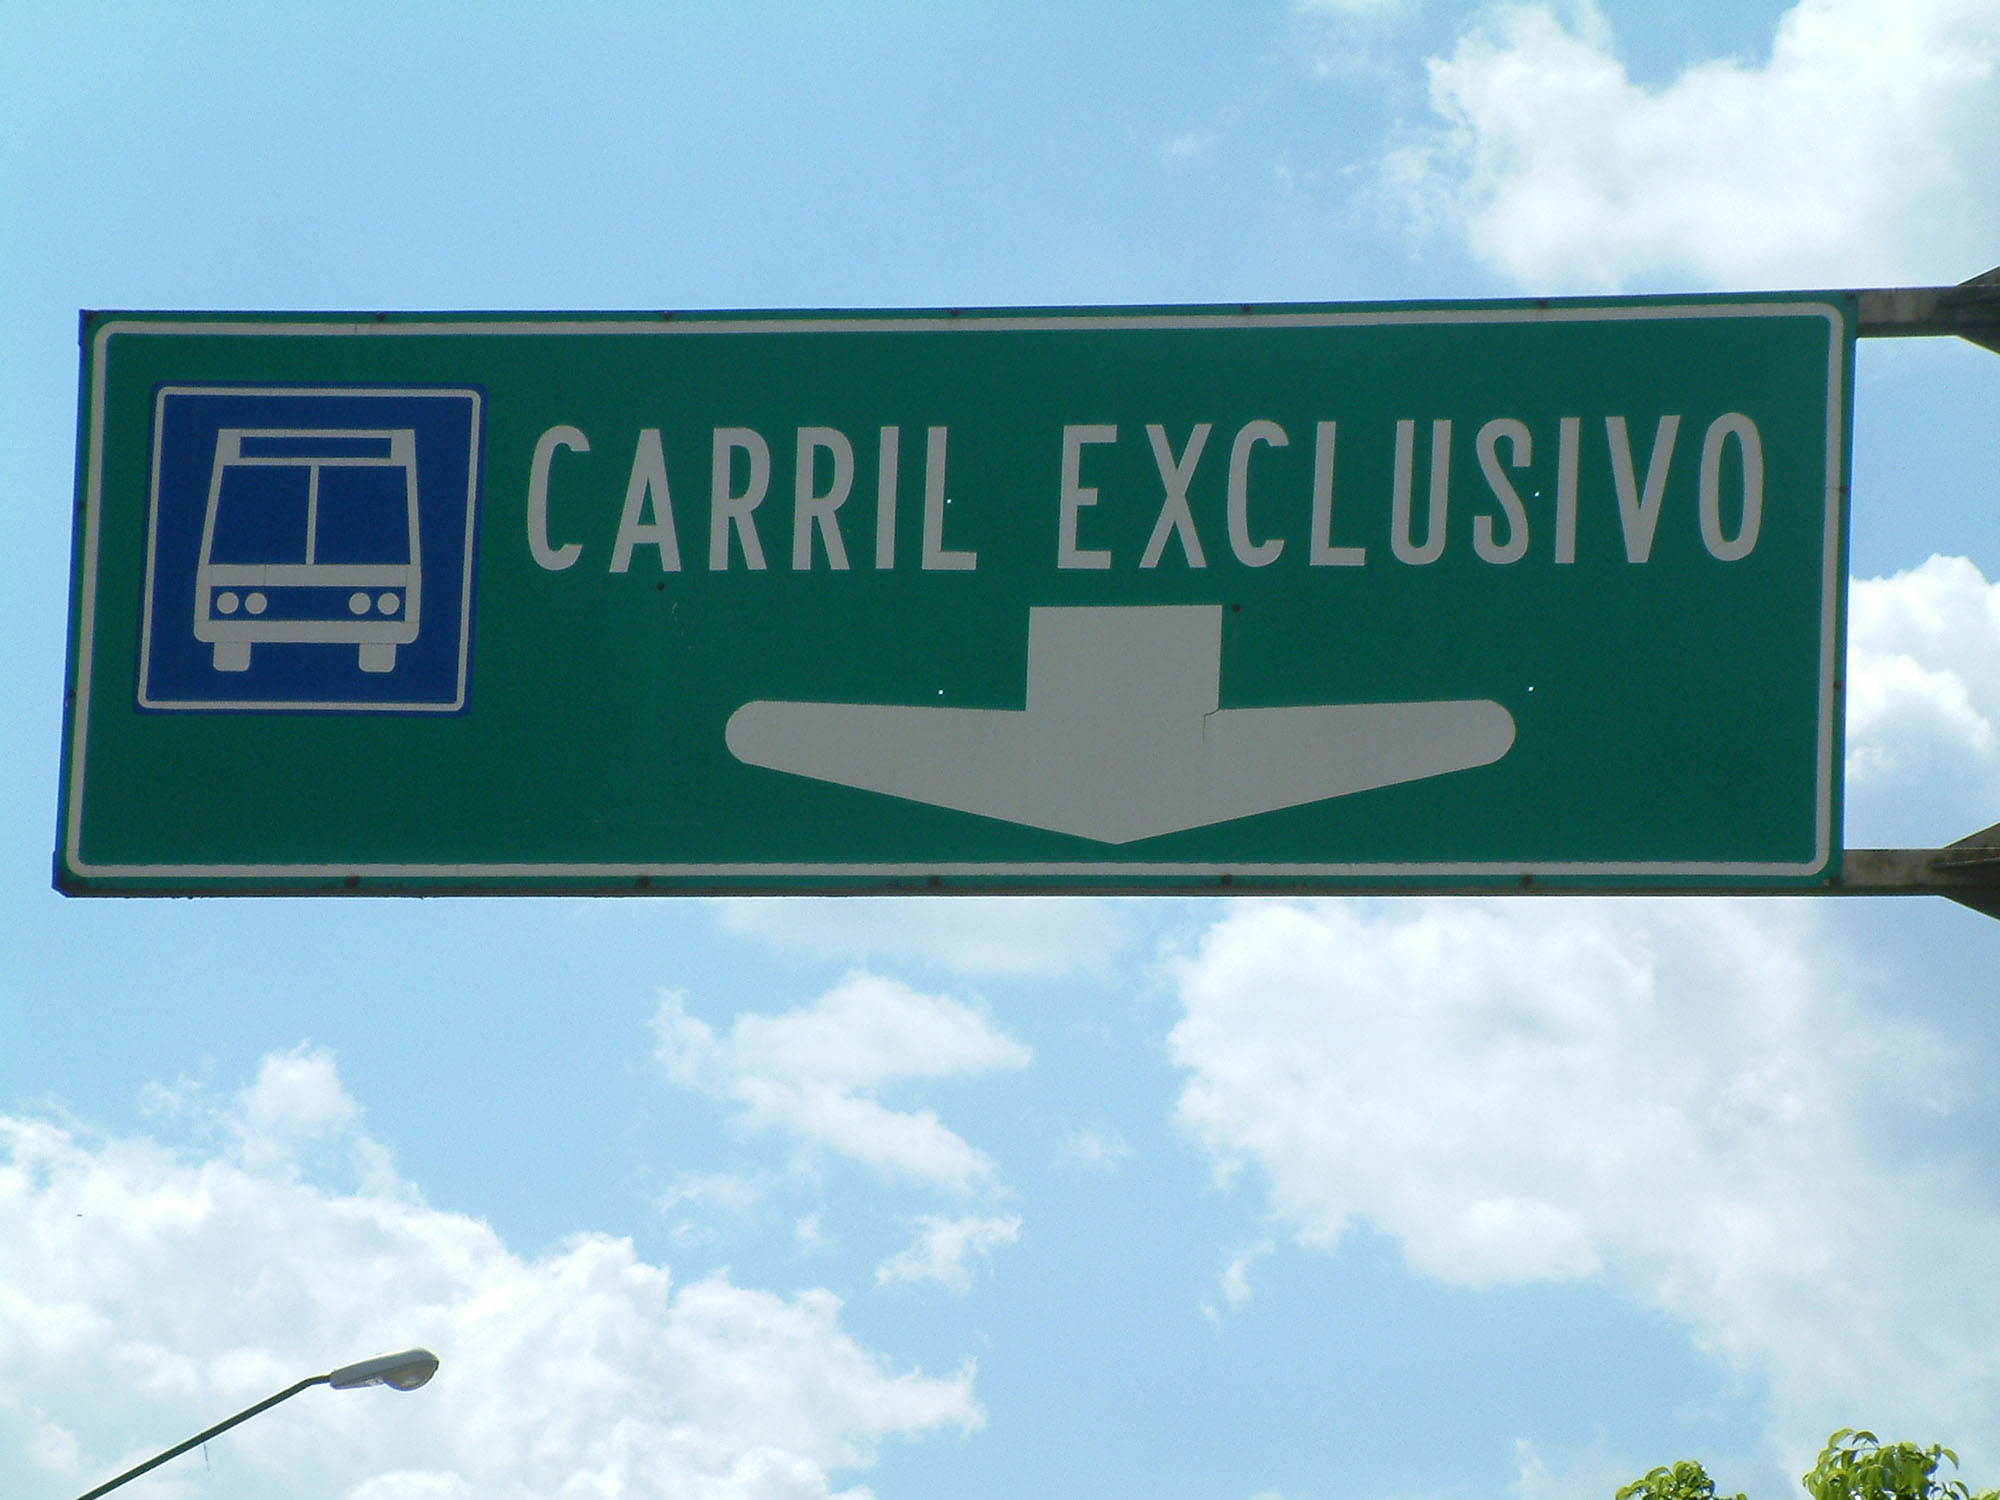 Fig. 23.26 Signage is a basic mechanism to designate an exclusive busway. This example is from León, Mexico.